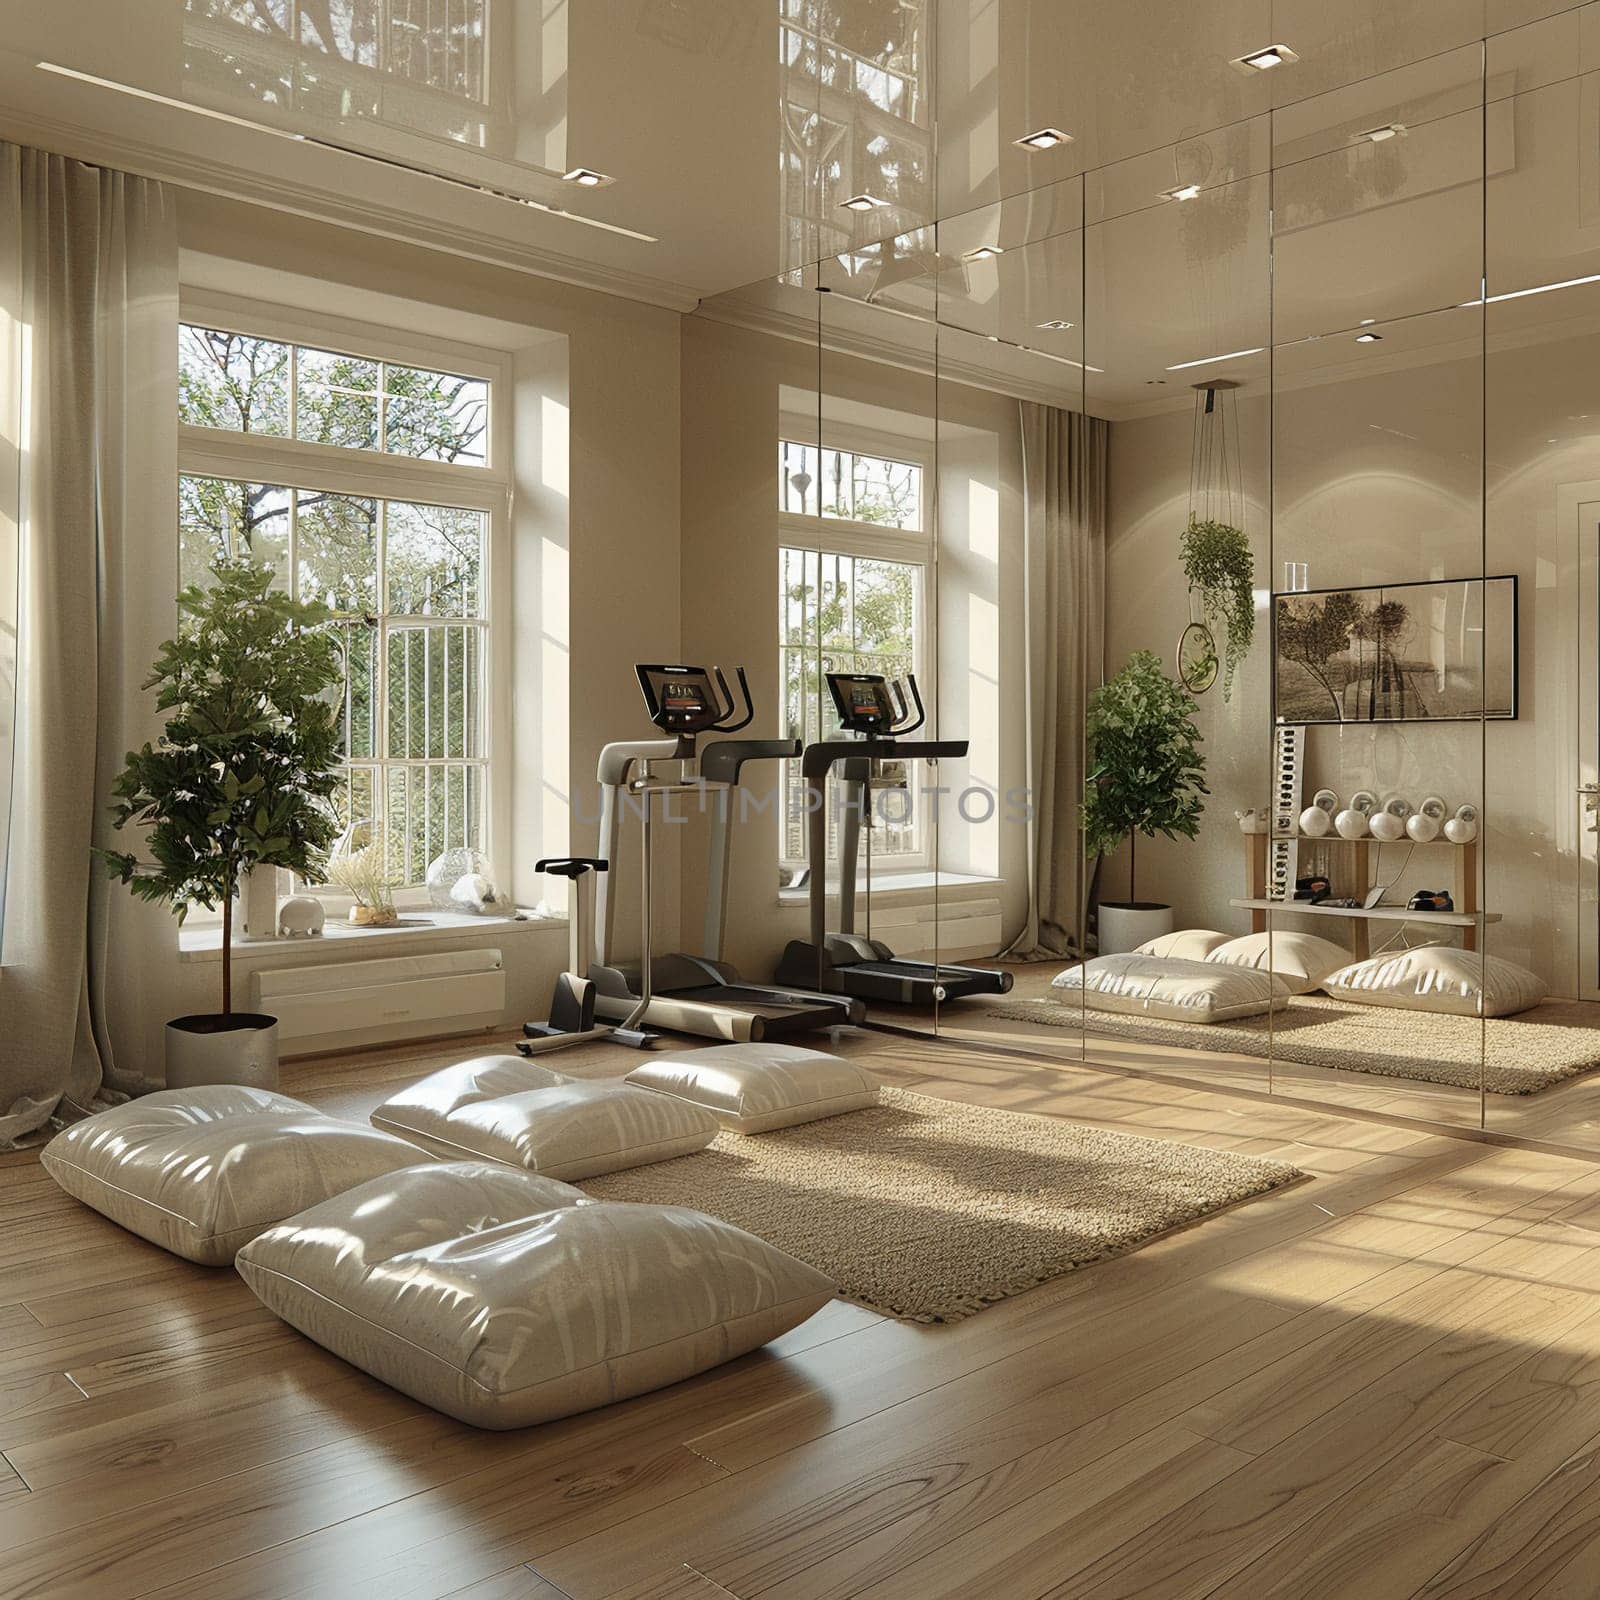 Functional and stylish home gym with mirrored walls and modern equipmentup32K HD by Benzoix